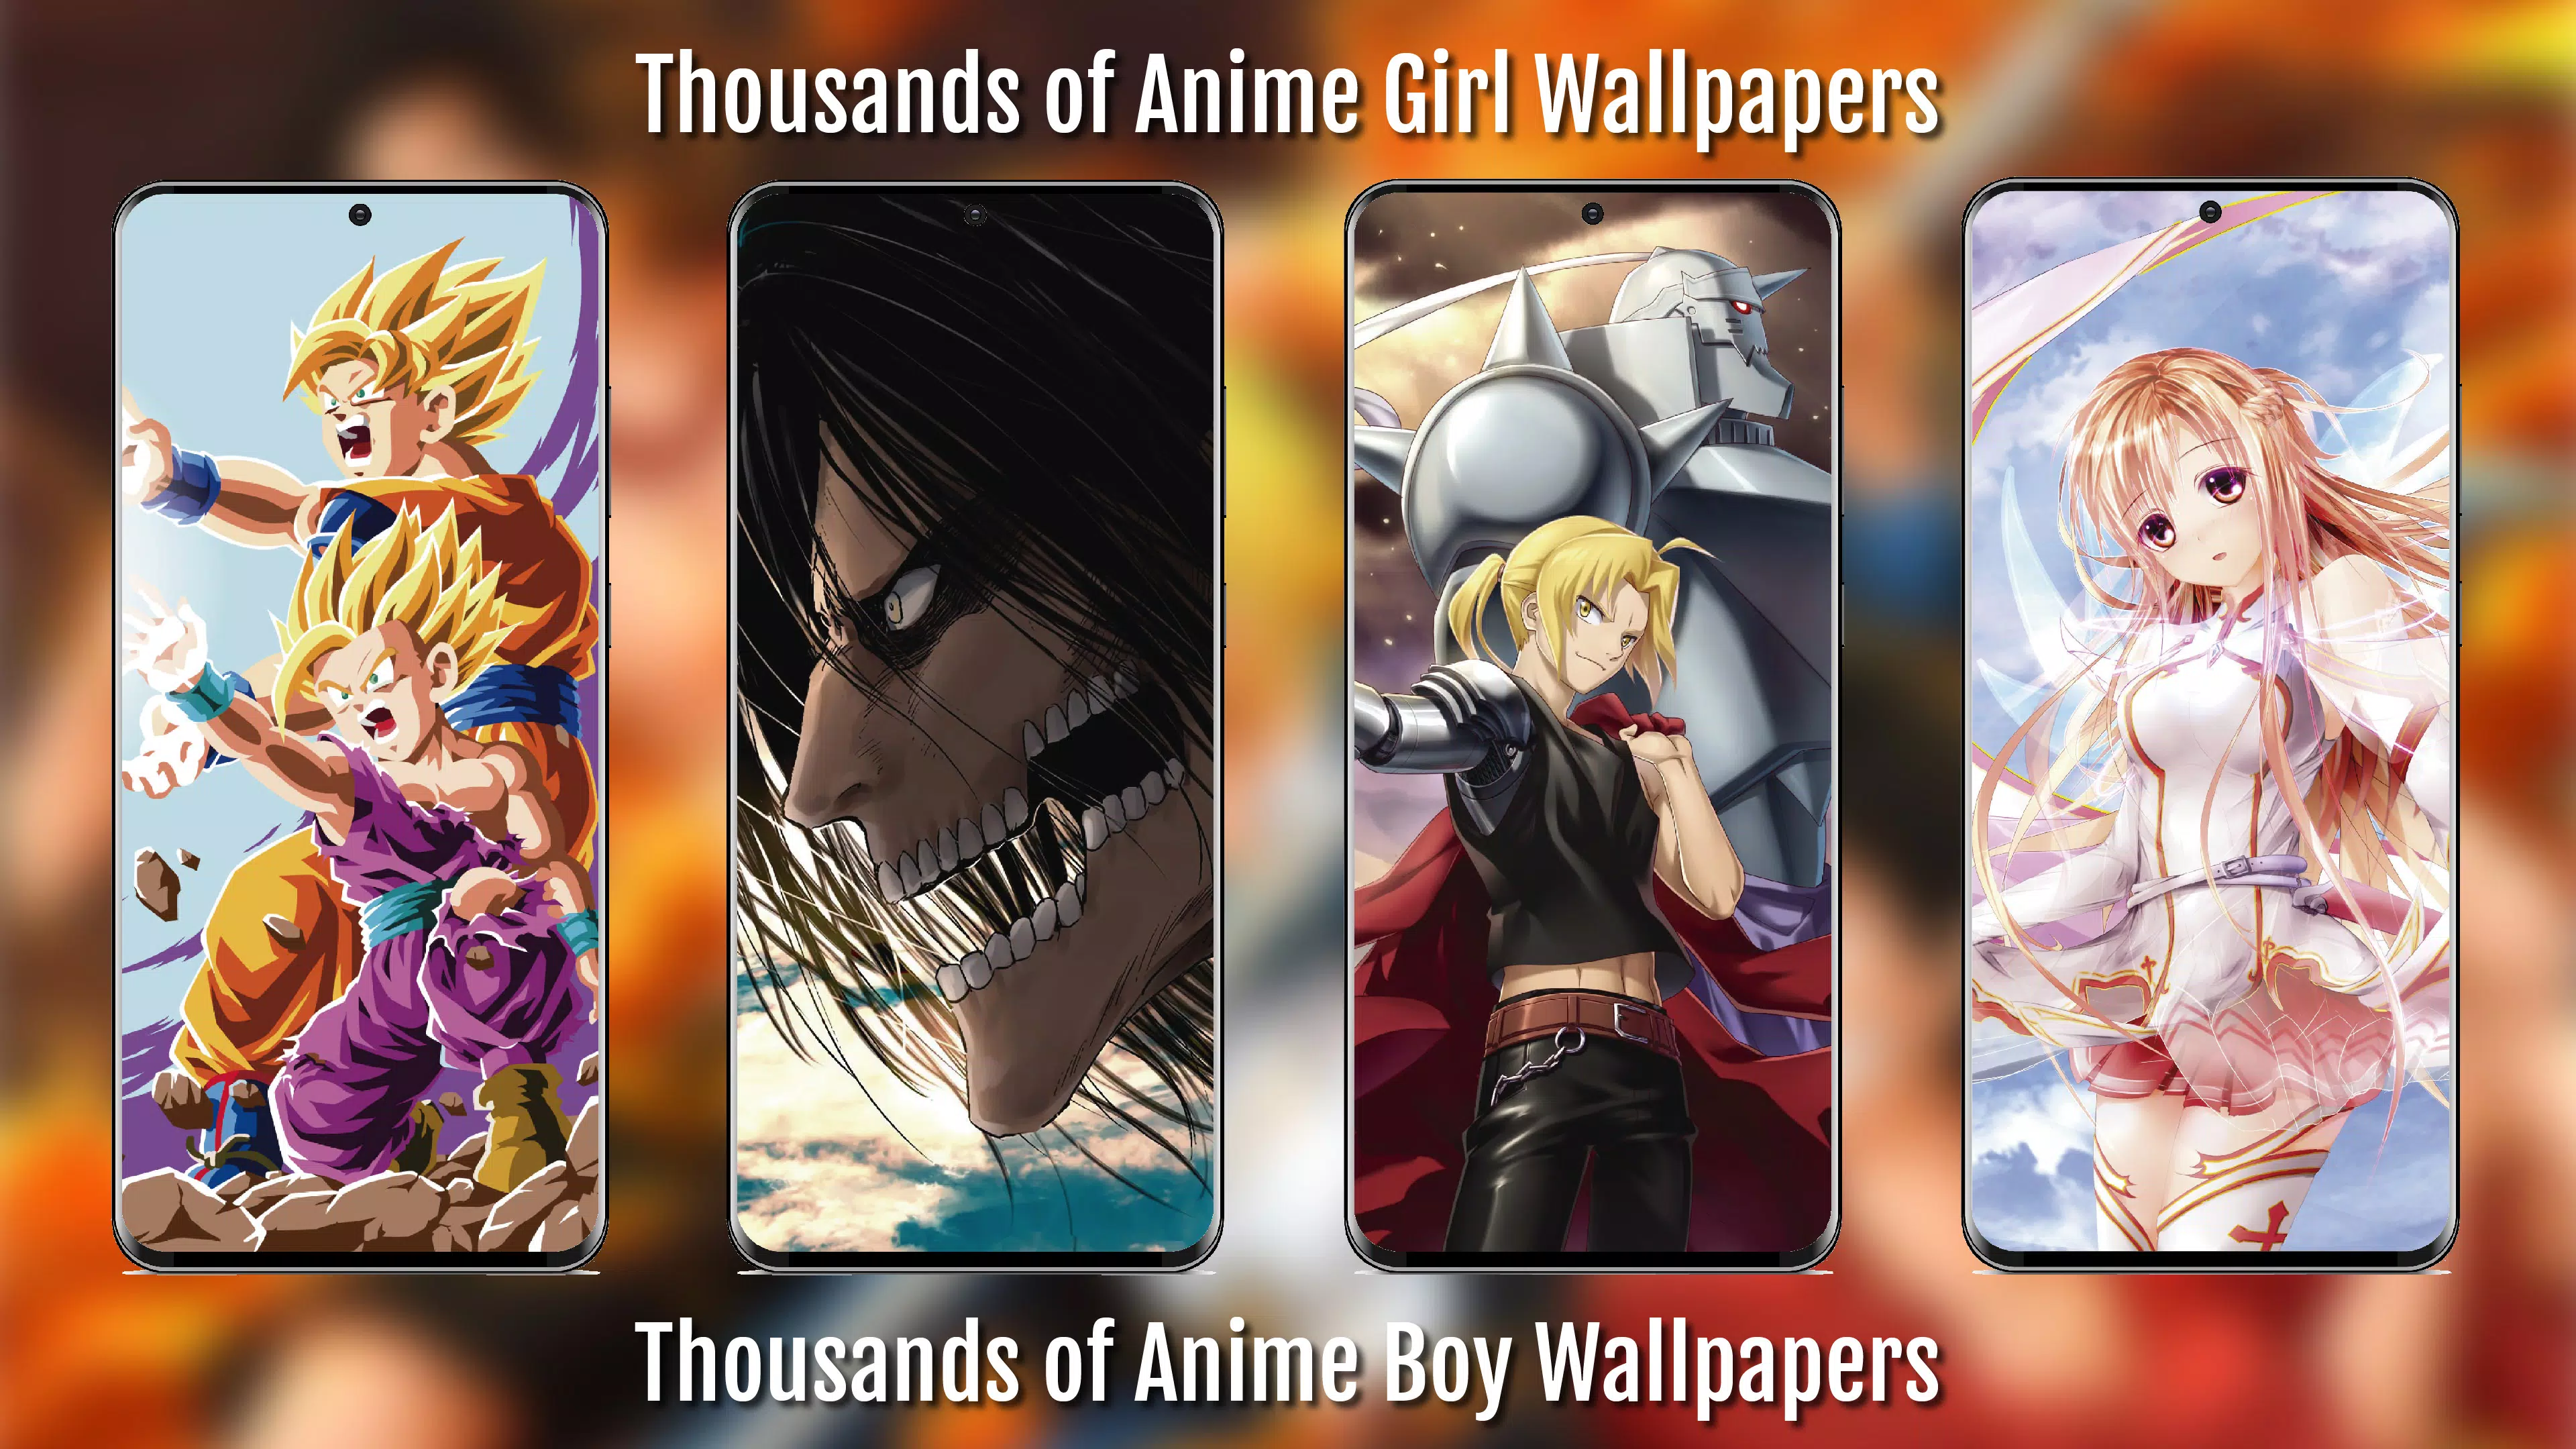 Download do APK de Game and Anime - Wallpaper 4K Full HD para Android